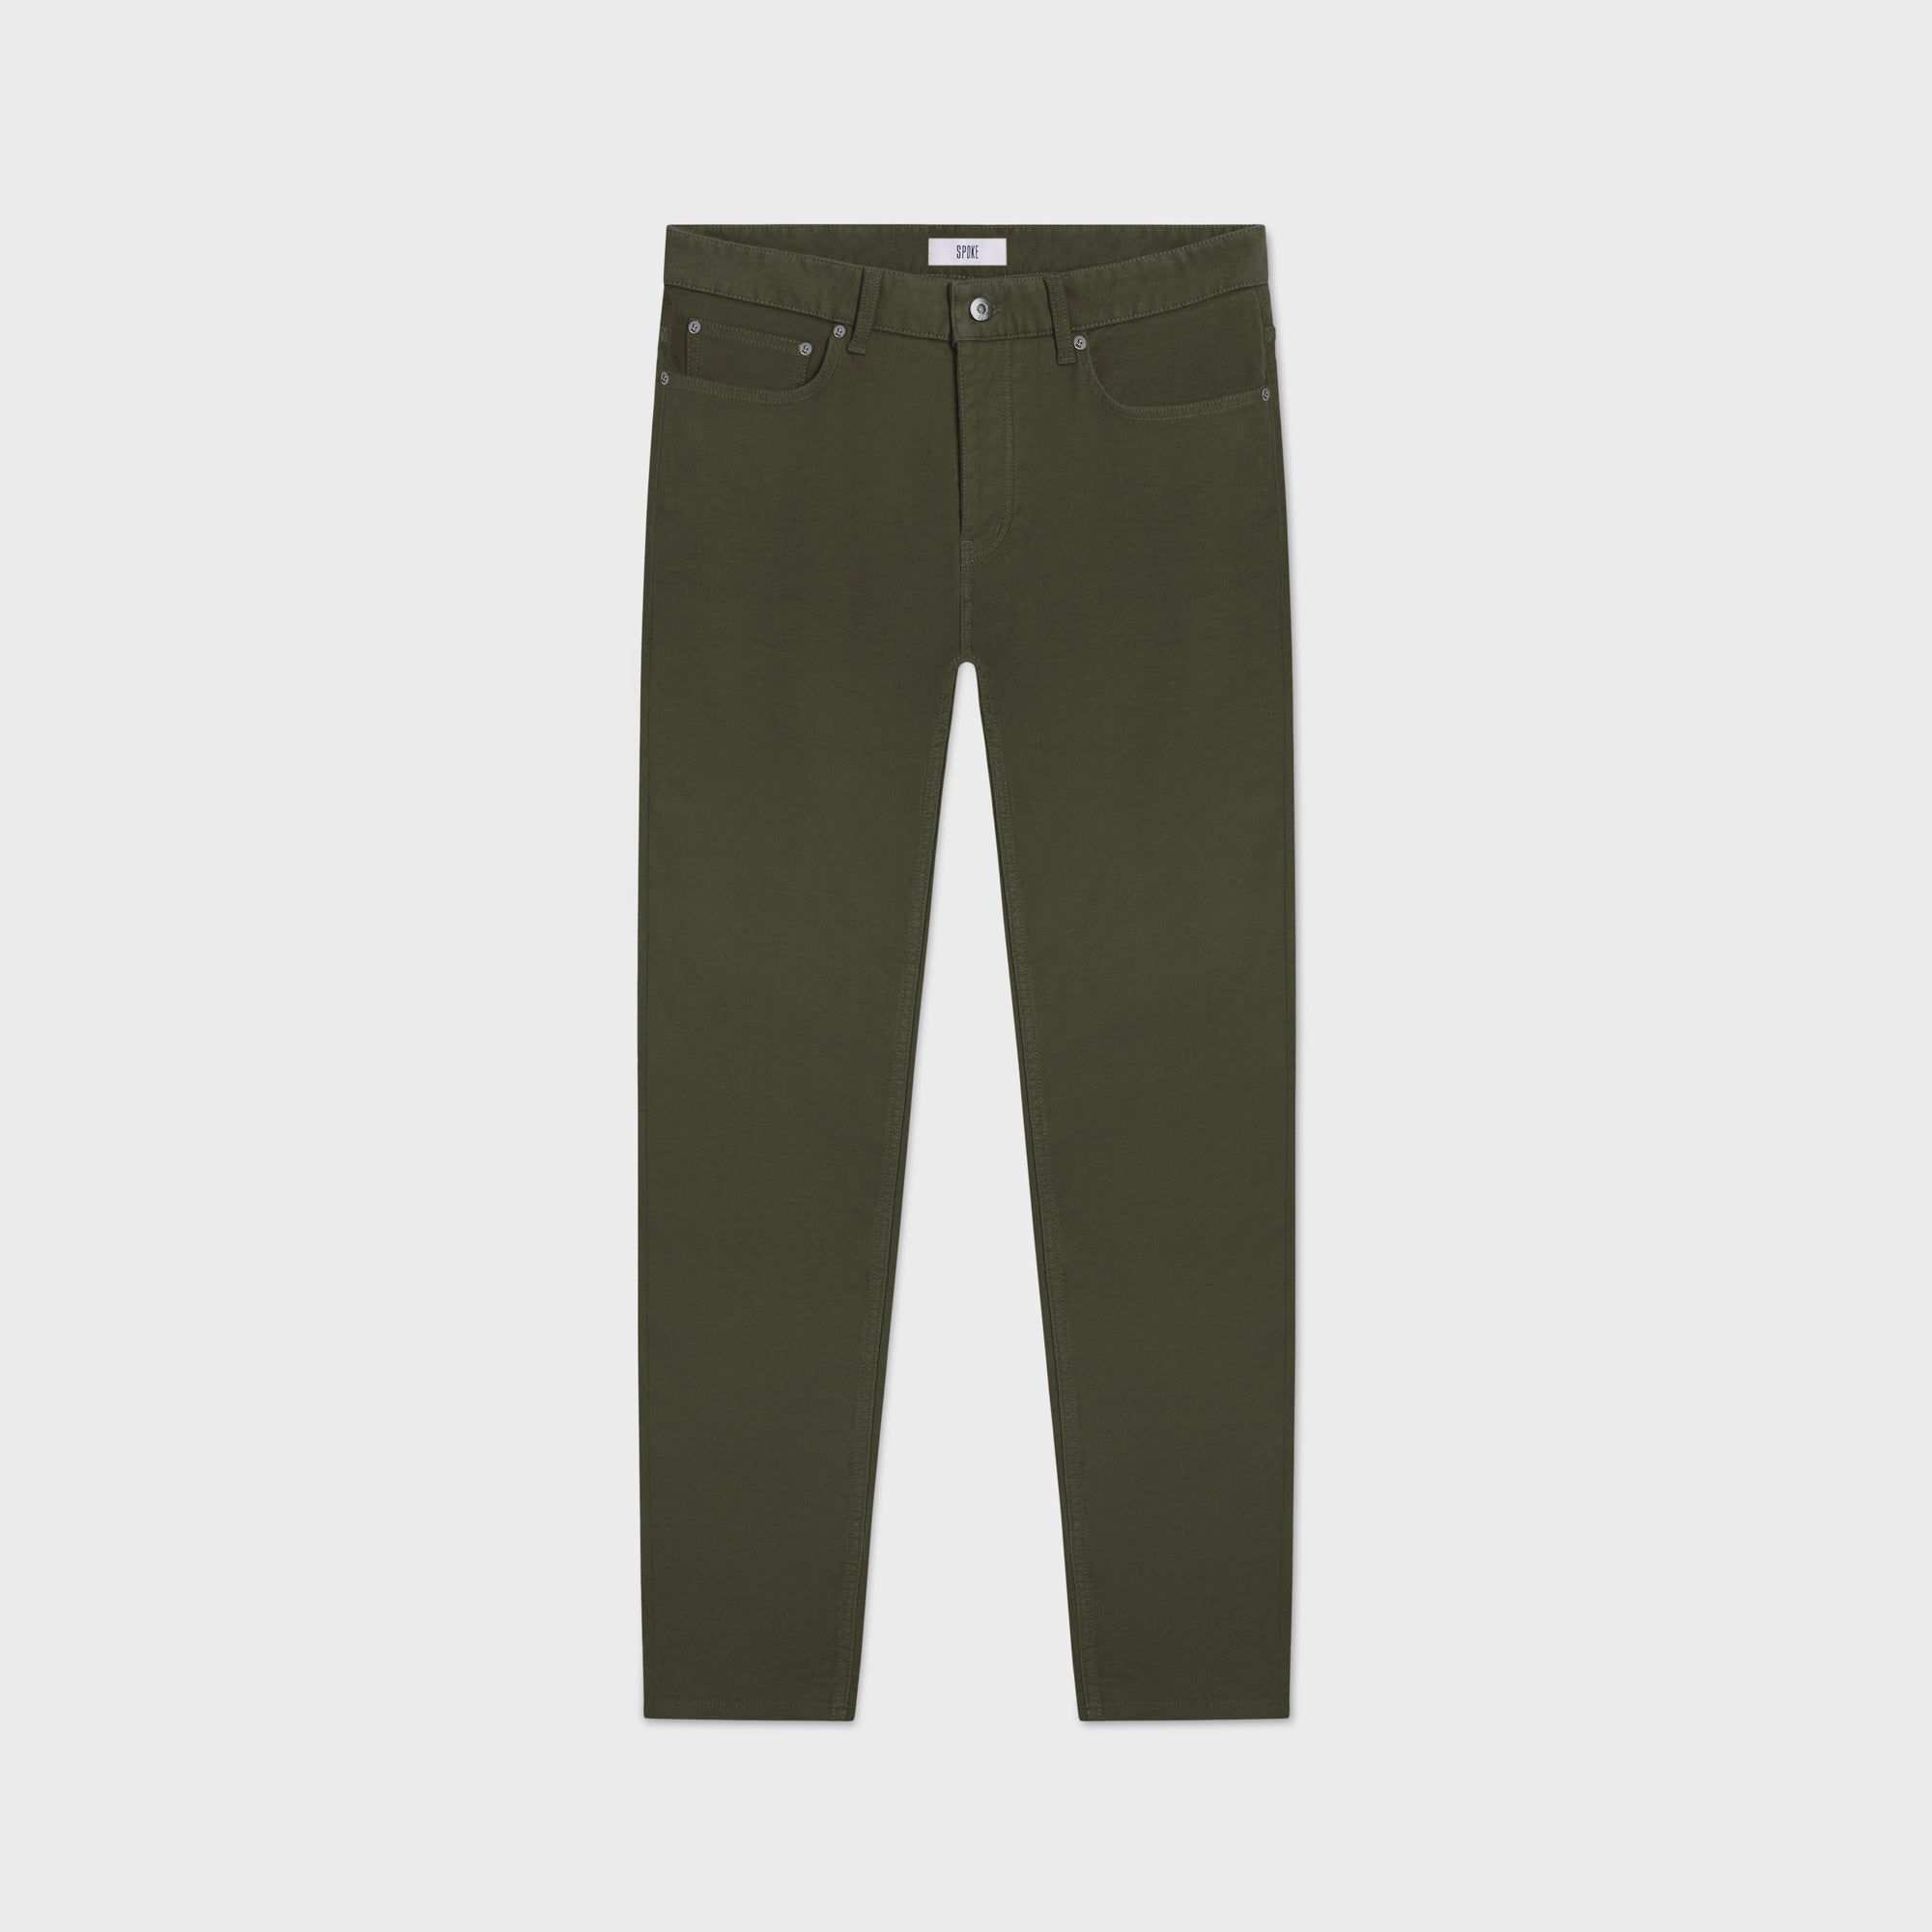 Pepe Jeans SOLID 3PCK - Pants - mean green/dark green 